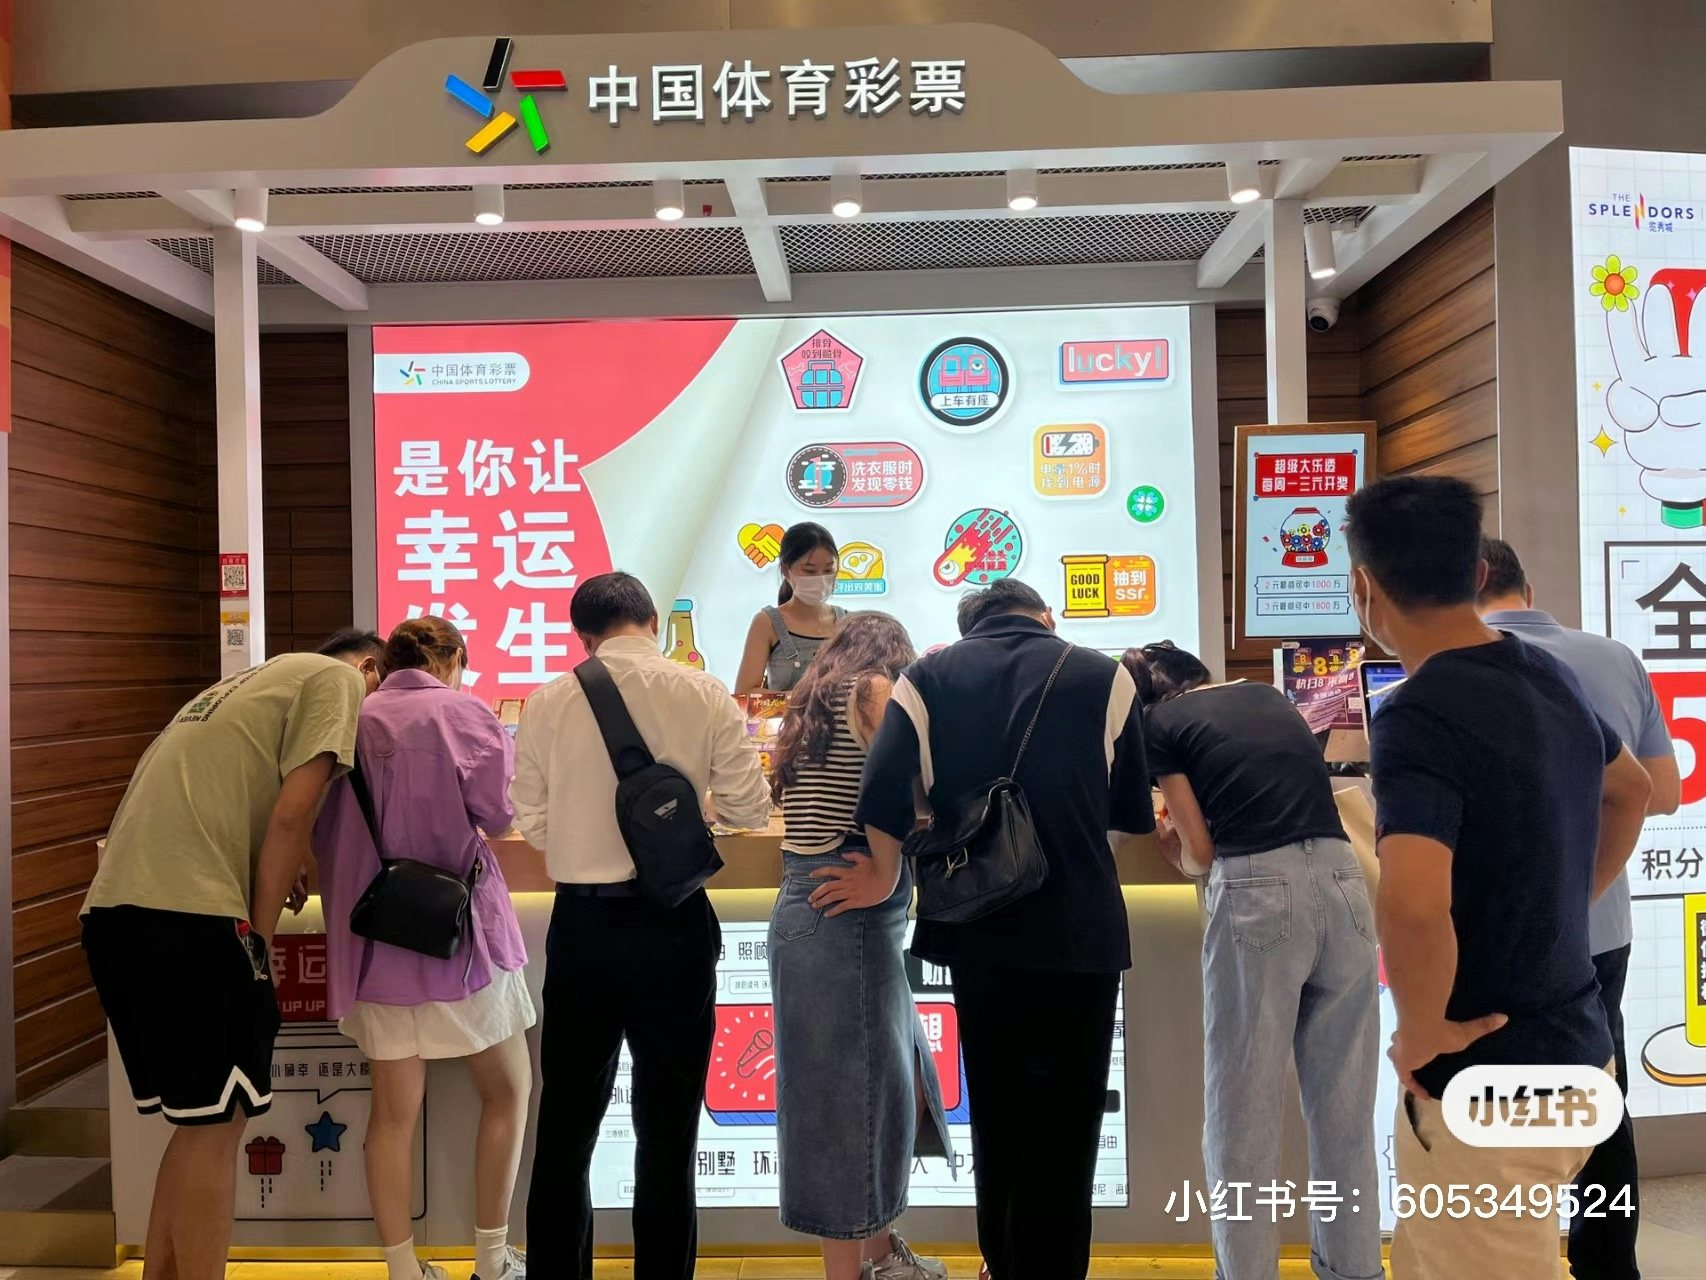 The lottery ticket boom in China means that booths and machines have popped up all over the country, here is one in Nanjing. Image: Xiaohongshu